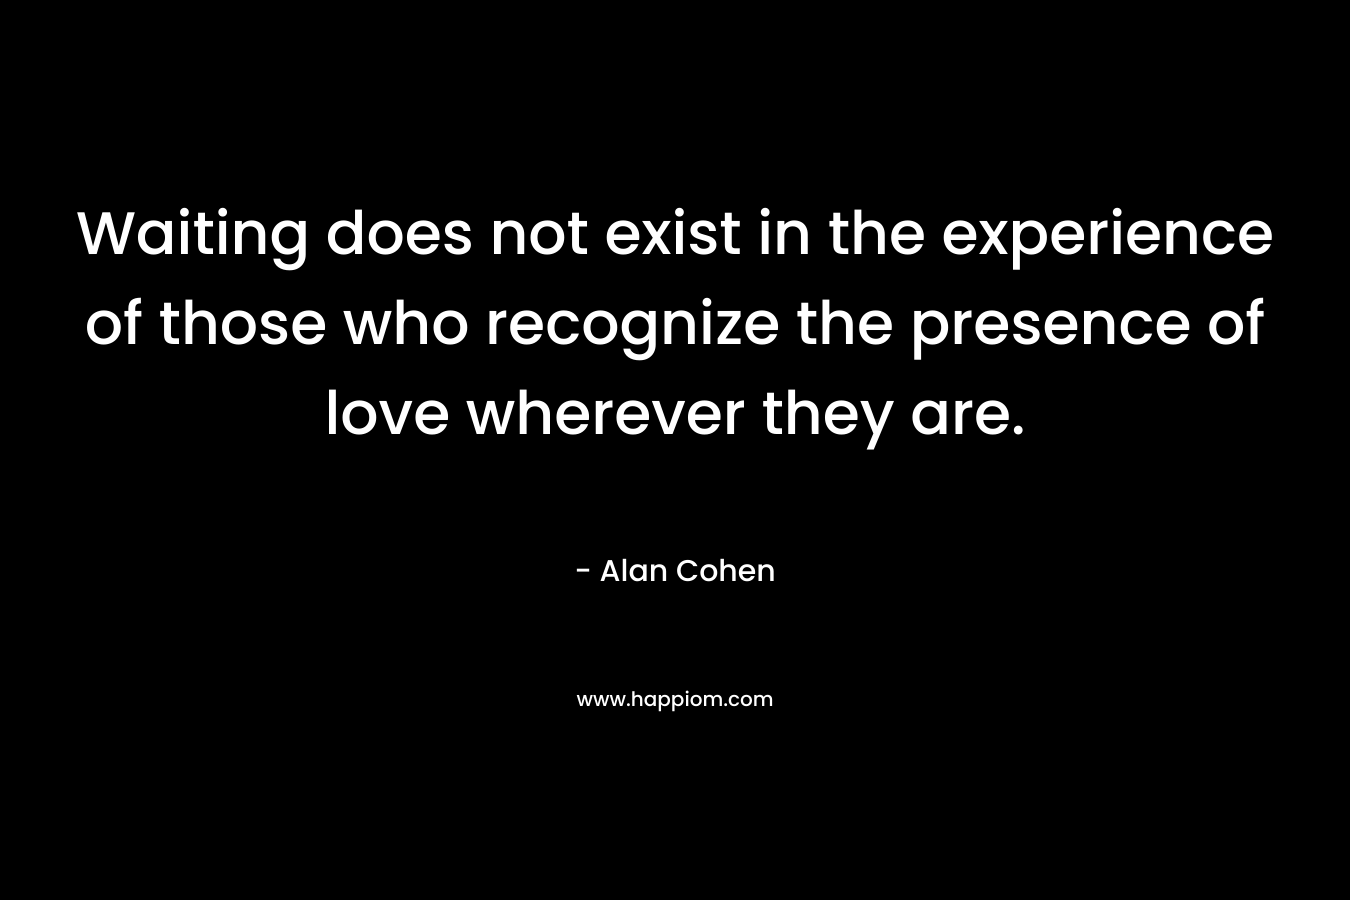 Waiting does not exist in the experience of those who recognize the presence of love wherever they are. – Alan Cohen